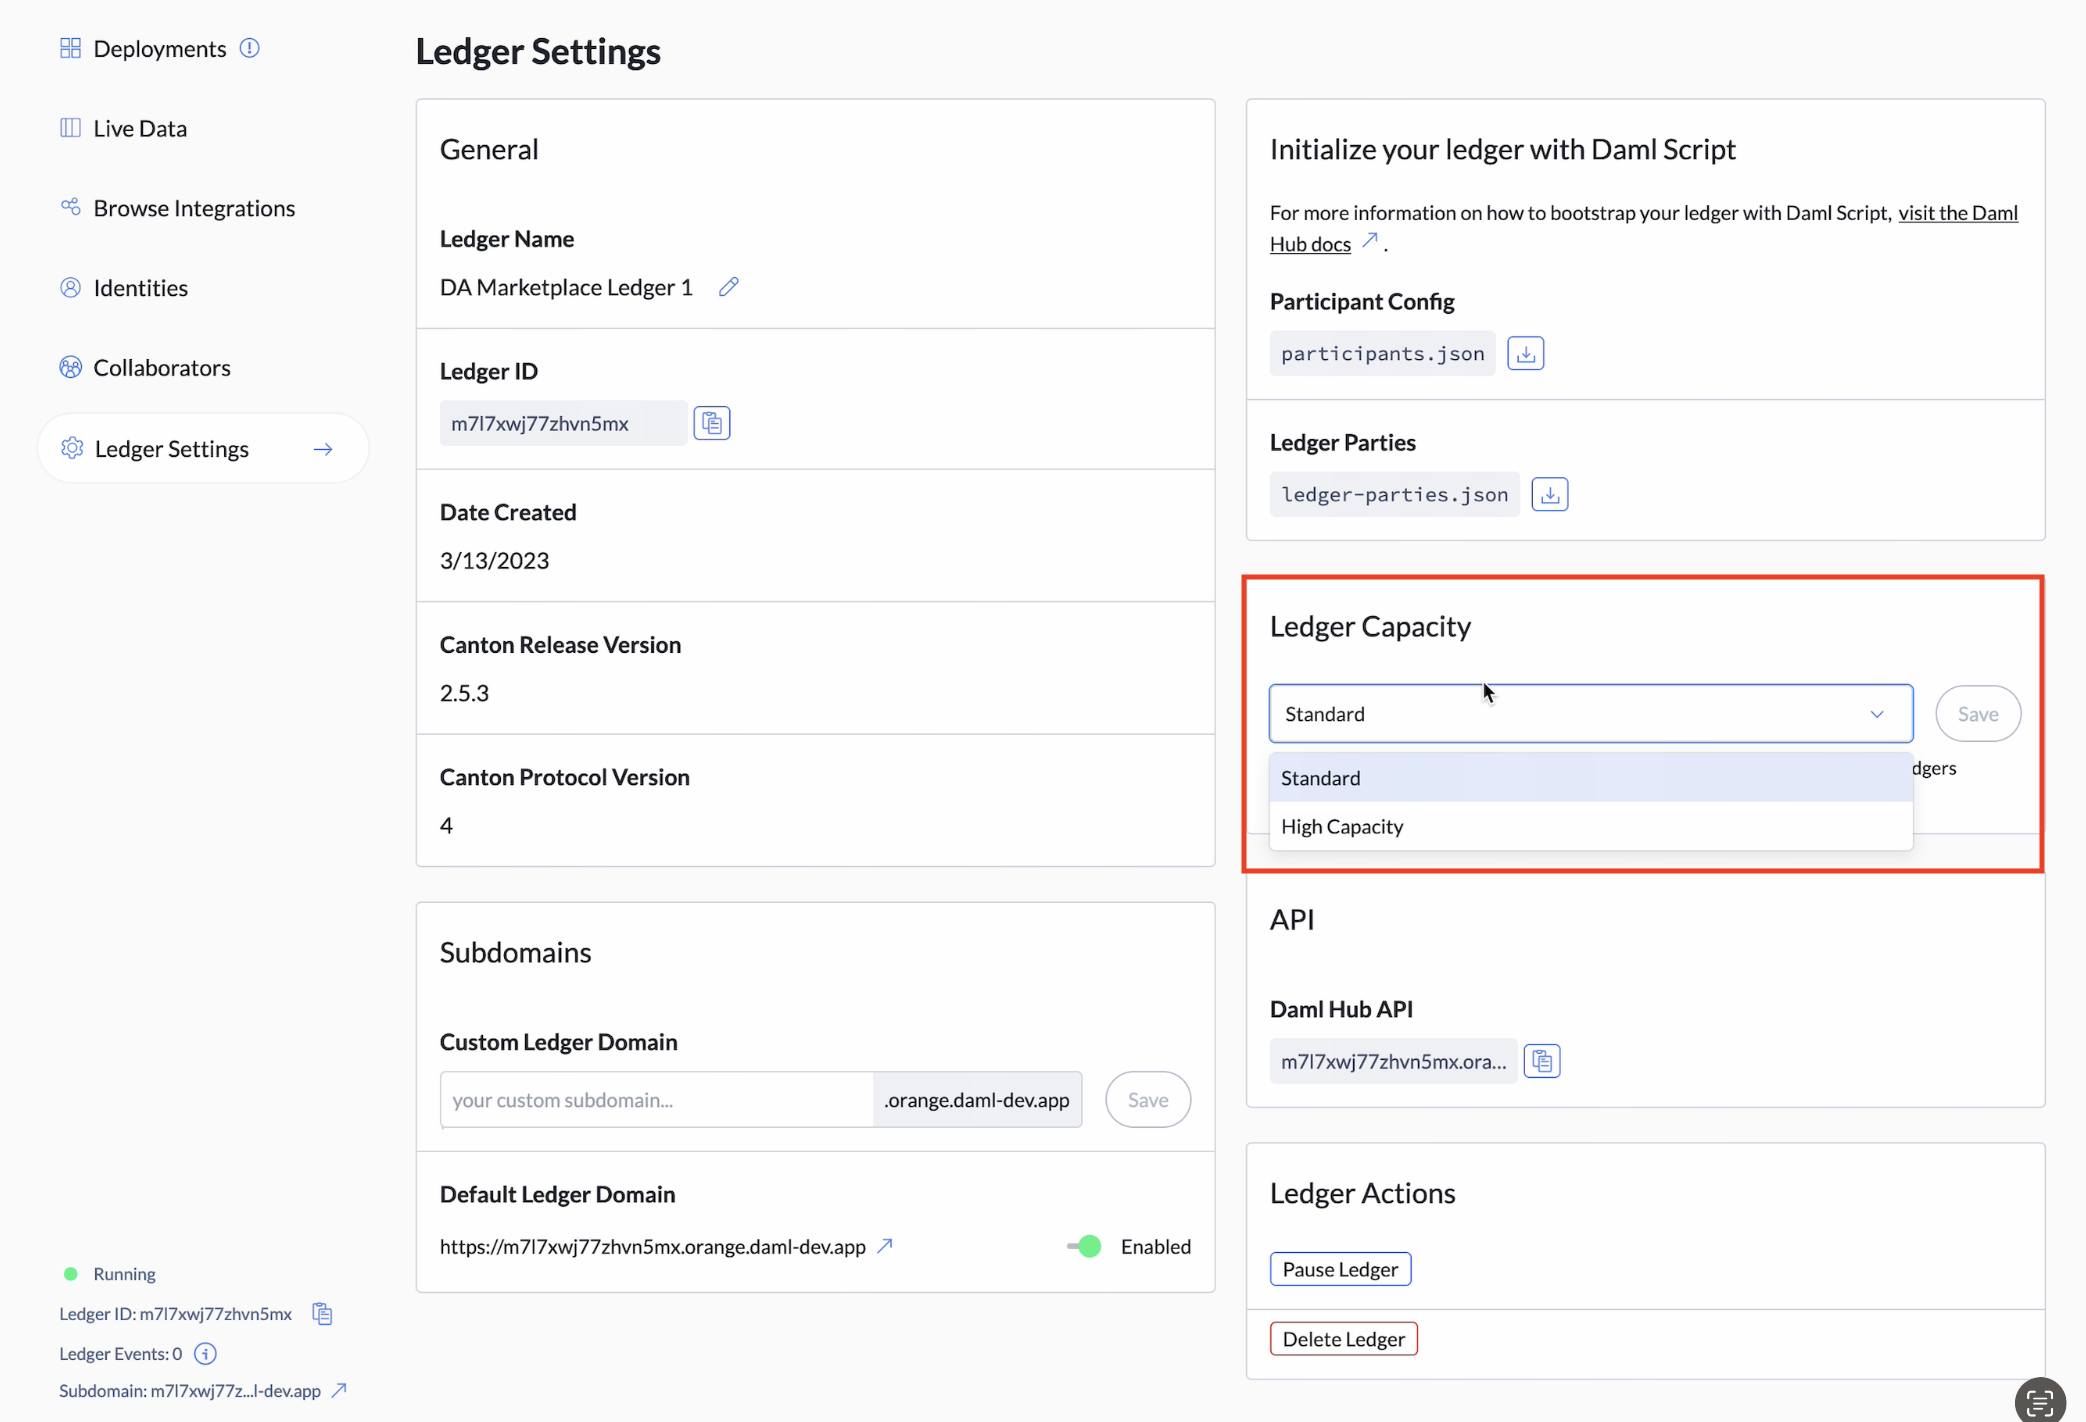 The Ledger Settings page, with the Ledger Capacity field highlighted and Standard selected in that field.